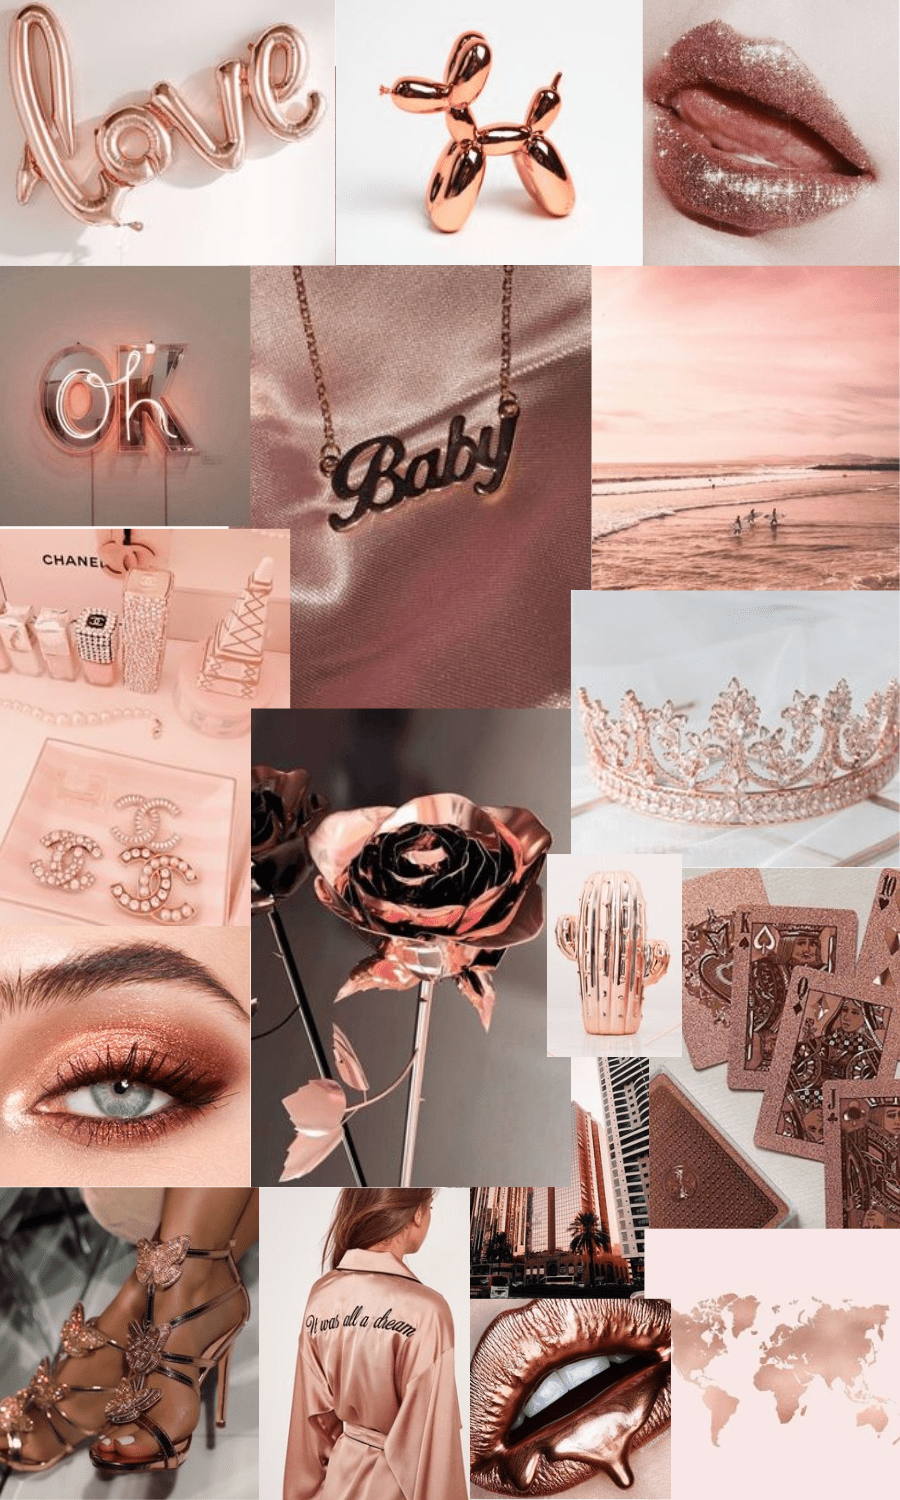 Aesthetic background with rose gold elements and a collage of photos. - Rose gold